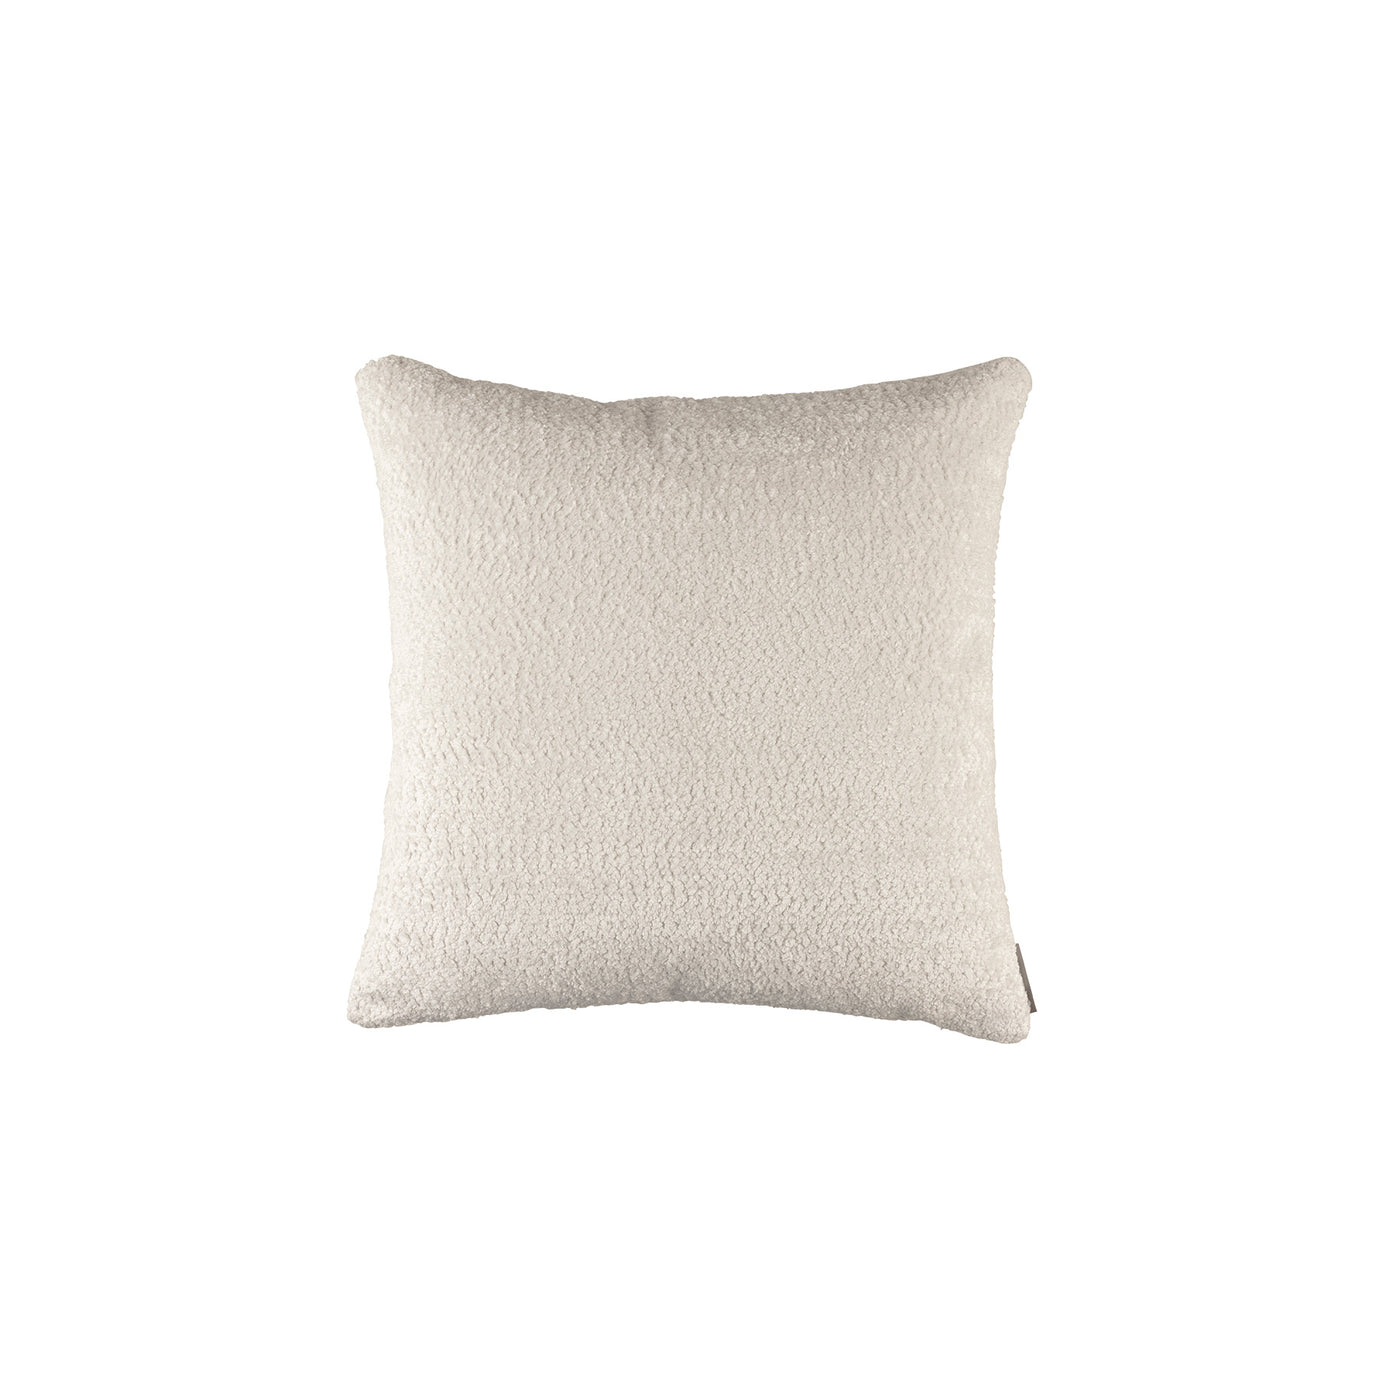 Zoey Oyster Small Square Pillow (22x22)